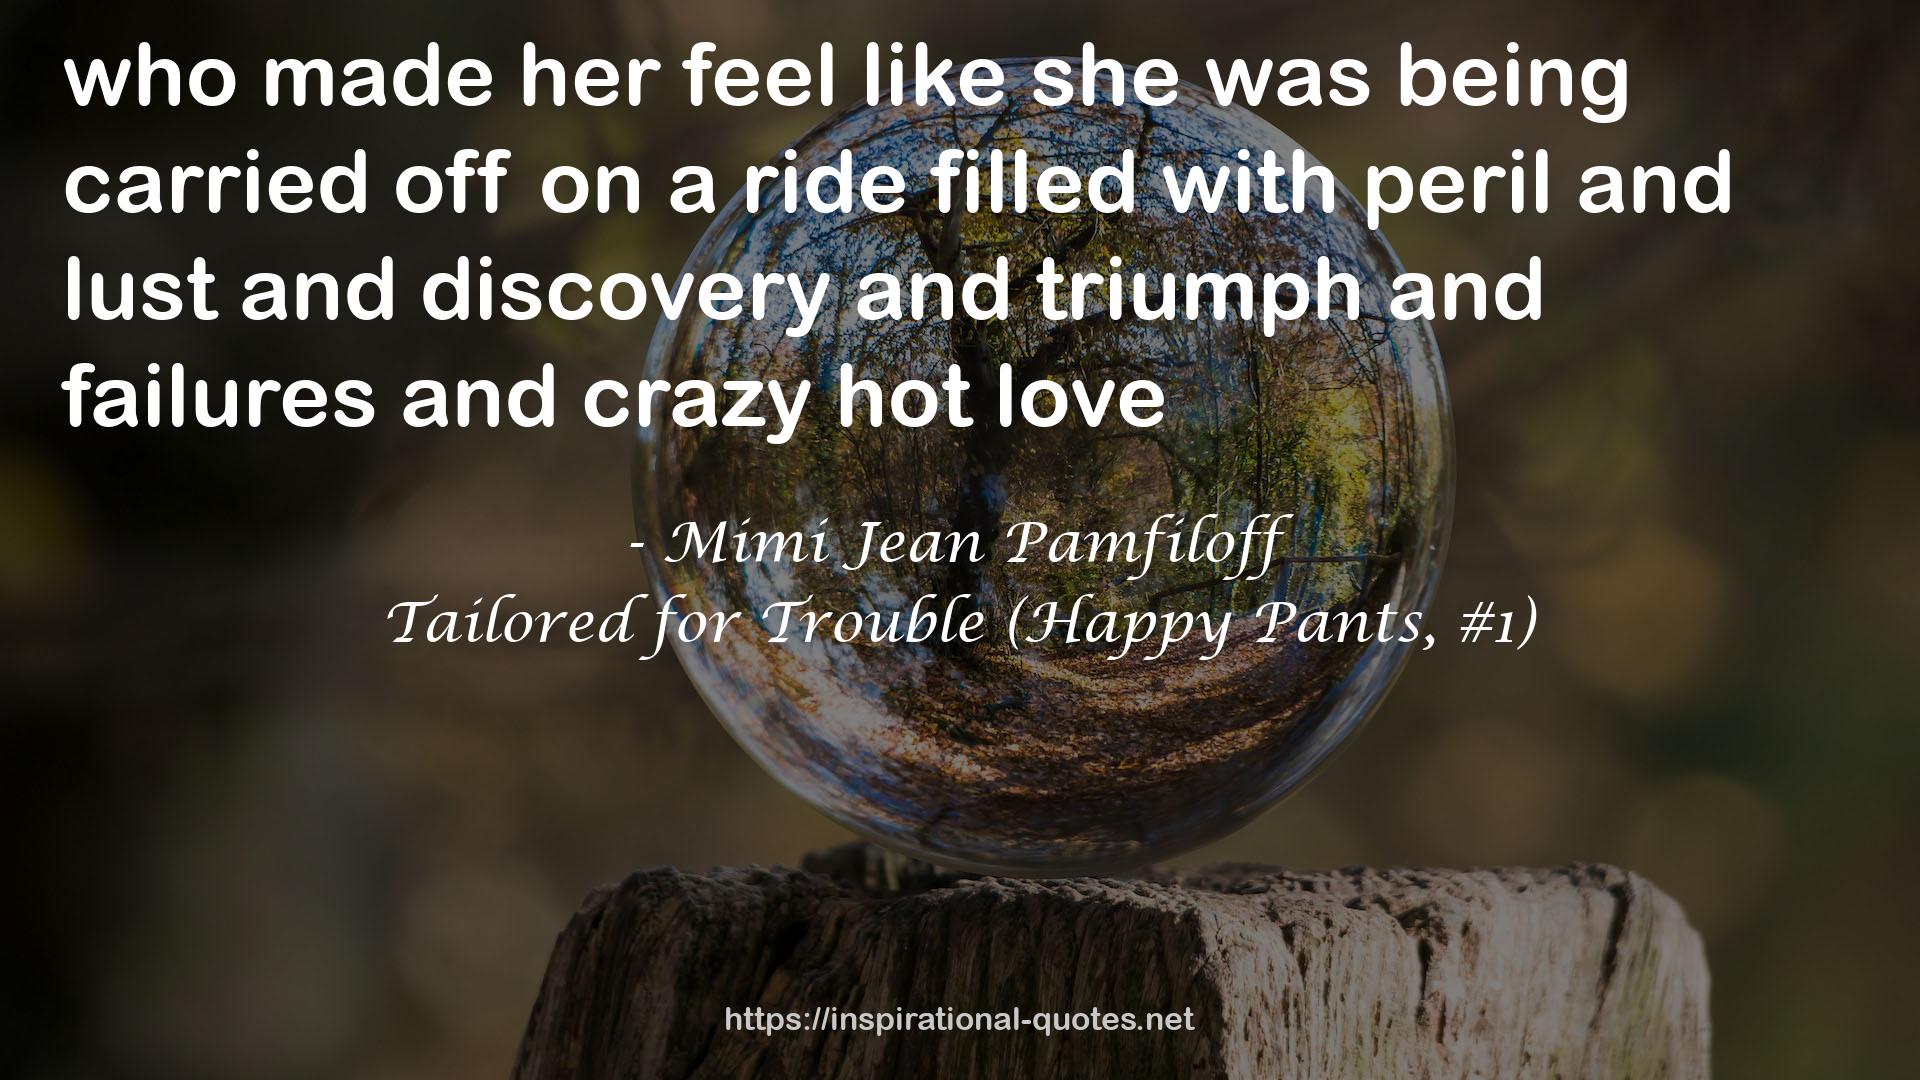 Tailored for Trouble (Happy Pants, #1) QUOTES